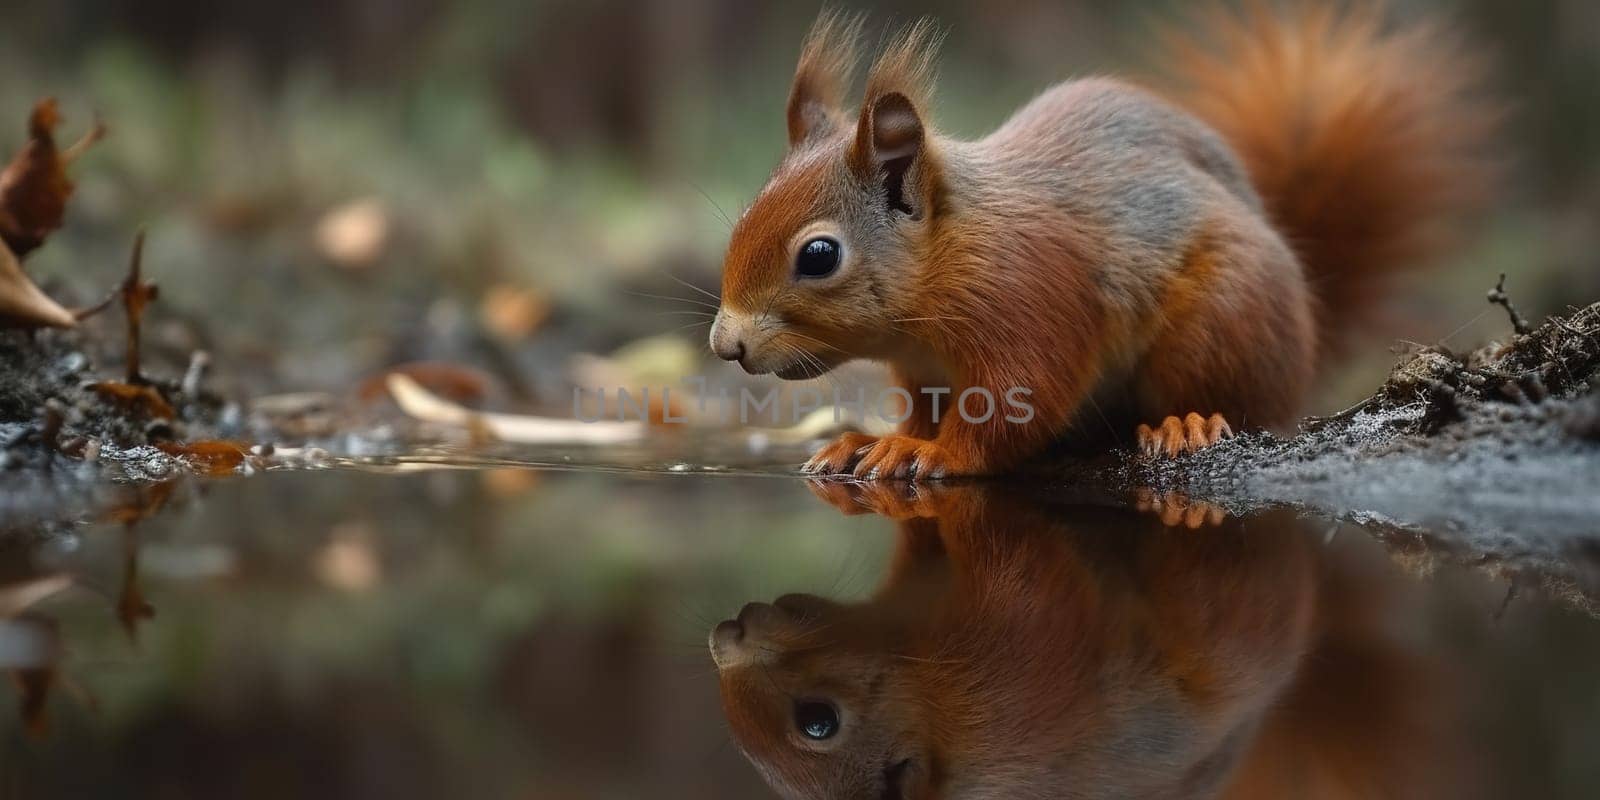 Cute Young Squirrel Over Puddle Of Water In Autumn Forest, Animal In Natural Habitat